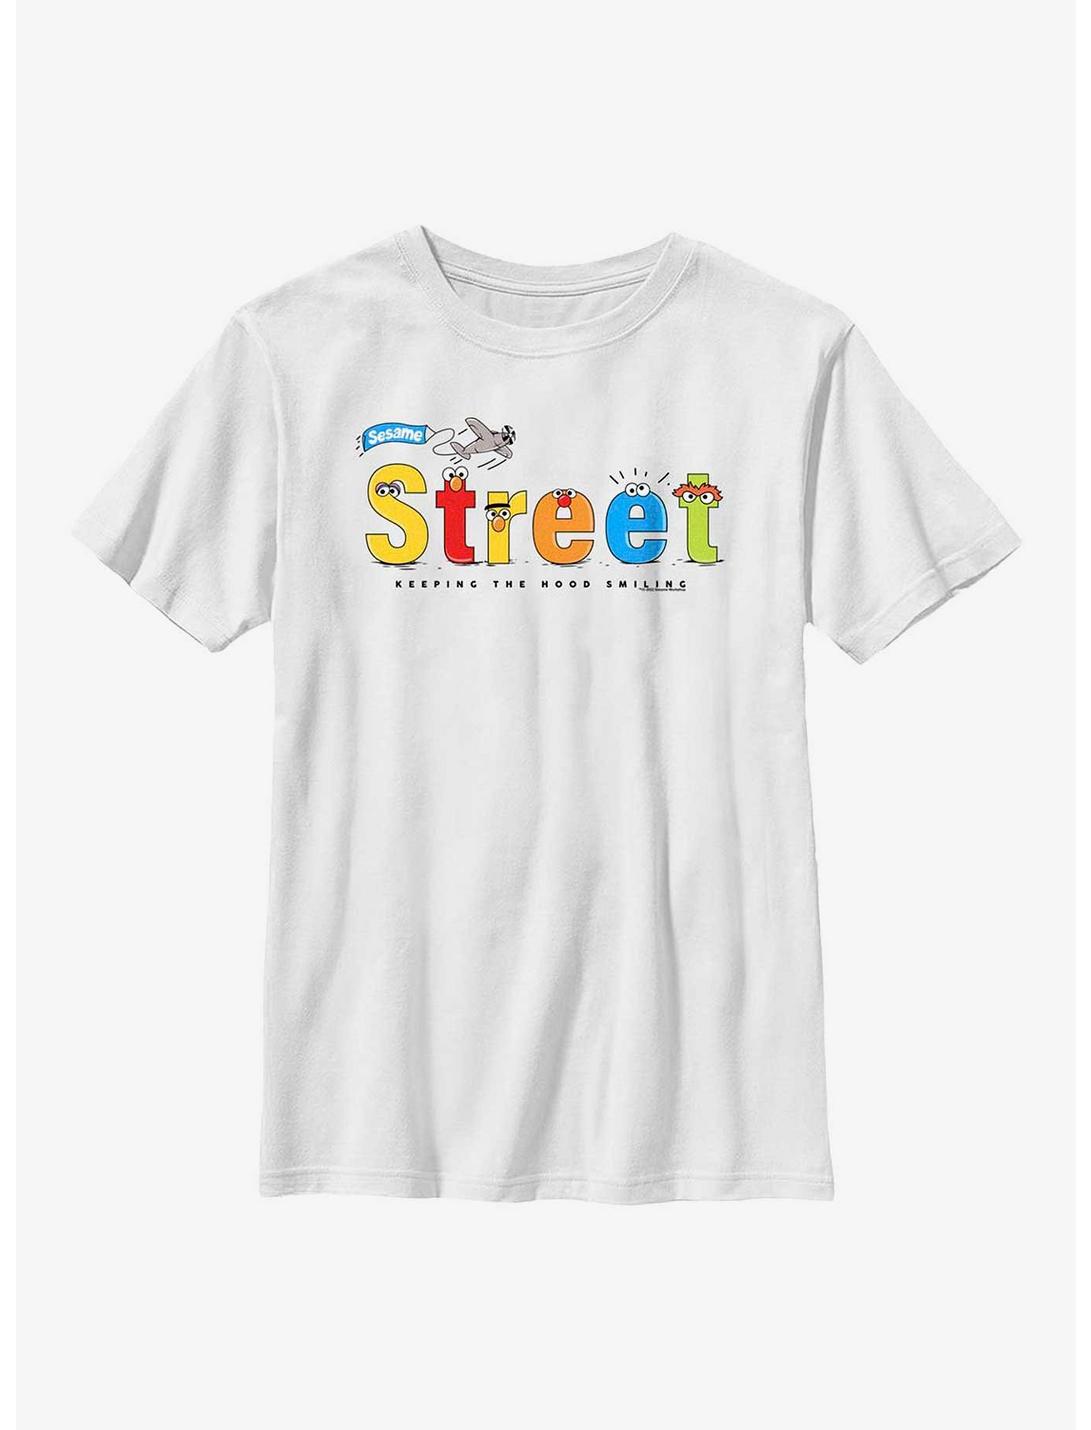 Sesame Street Making The Streets Youth T-Shirt, WHITE, hi-res